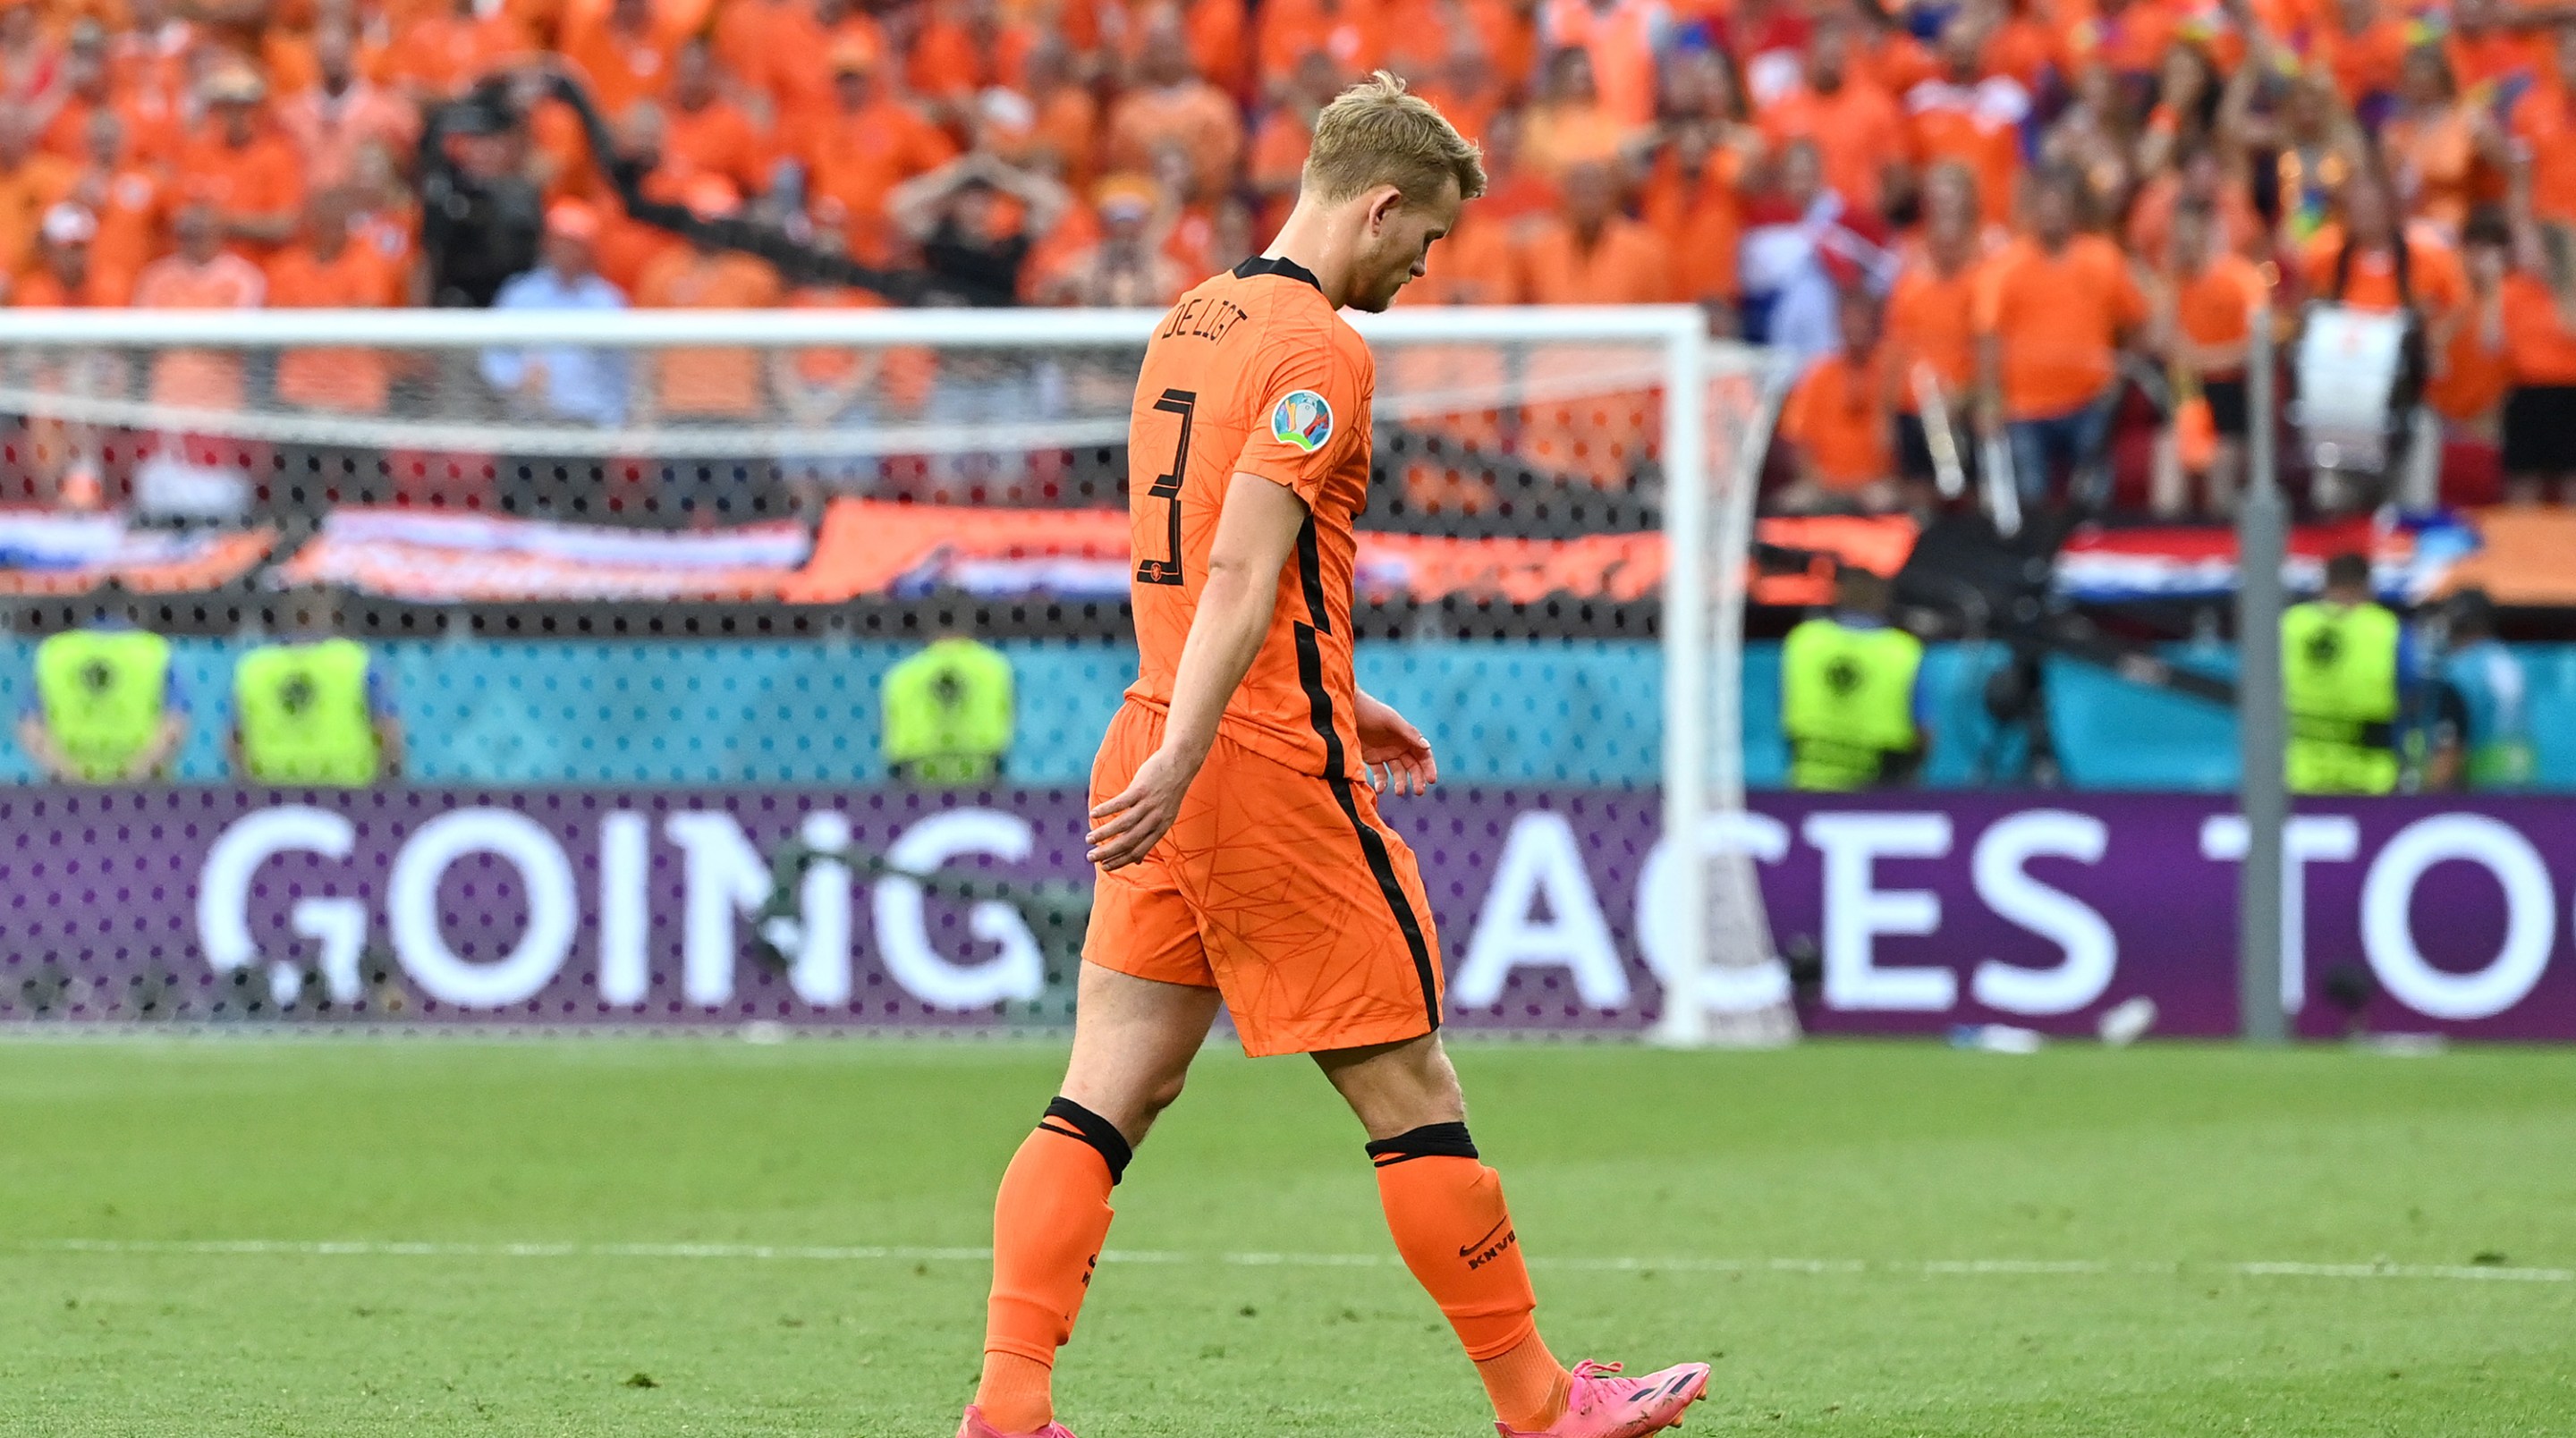 Matthijs de Ligt of Netherlands looks dejected after being shown a red card during the UEFA Euro 2020 Championship Round of 16 match between Netherlands and Czech Republic at Puskas Arena on June 27, 2021 in Budapest, Hungary.